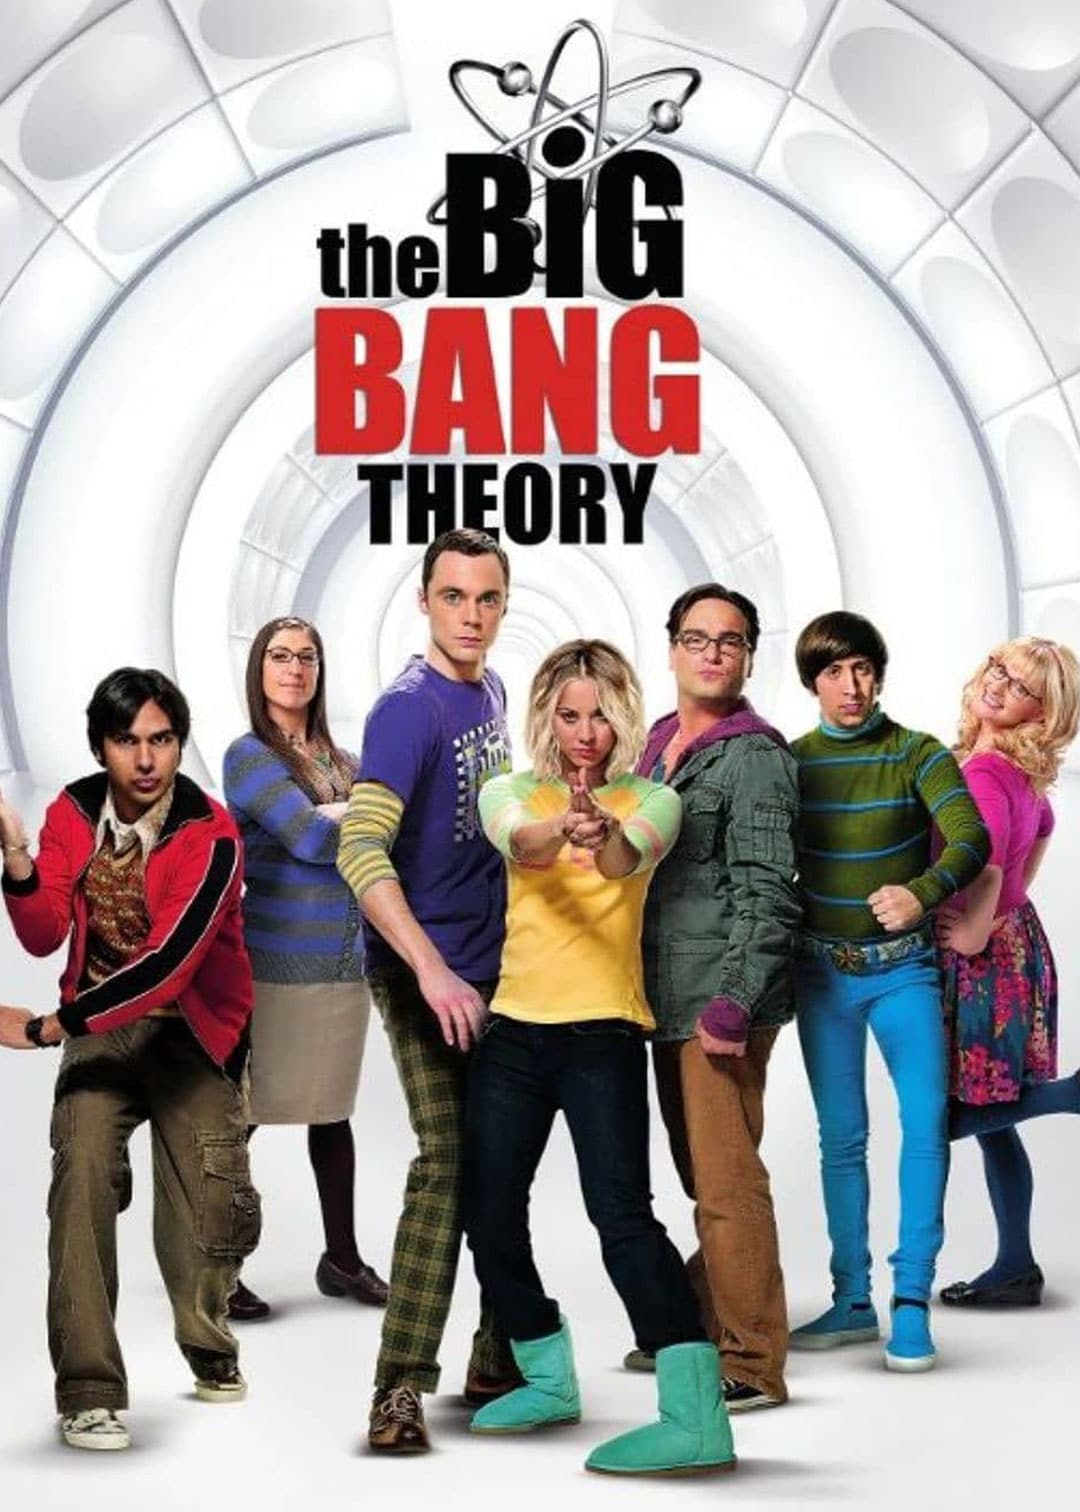 The Big Bang Theory Season 9 Web Series (2015) | Release Date, Review ...